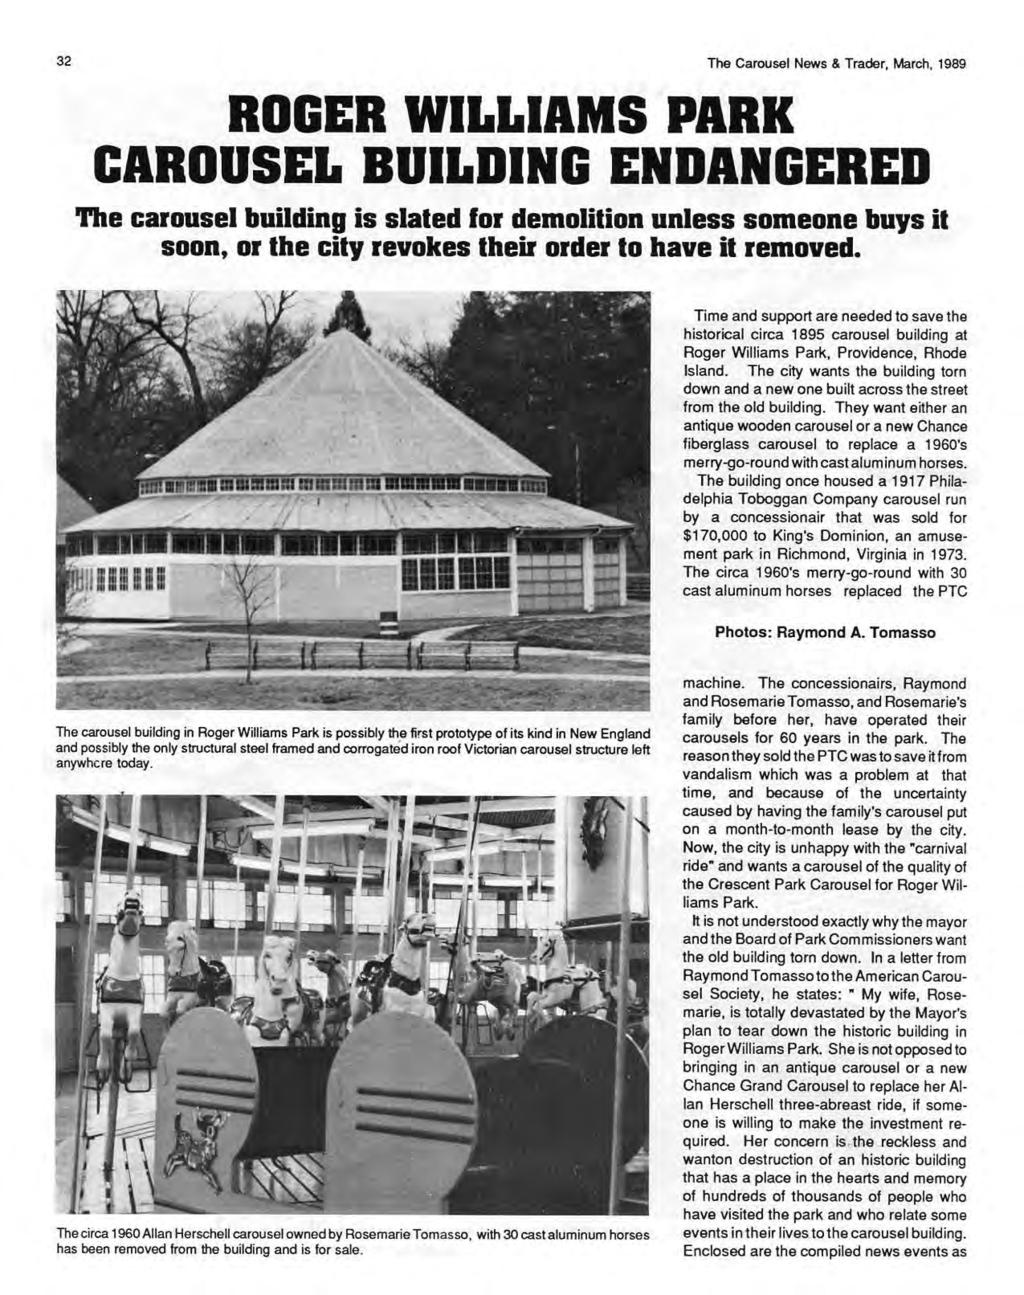 32 The Carousel News & Trader, March, 1989 ROGER WILLIAMS PARK CAROUSEL BUILDING ENDANGERED The carousel building is slated for demolition unless someone buys it soon, or the city revokes their order